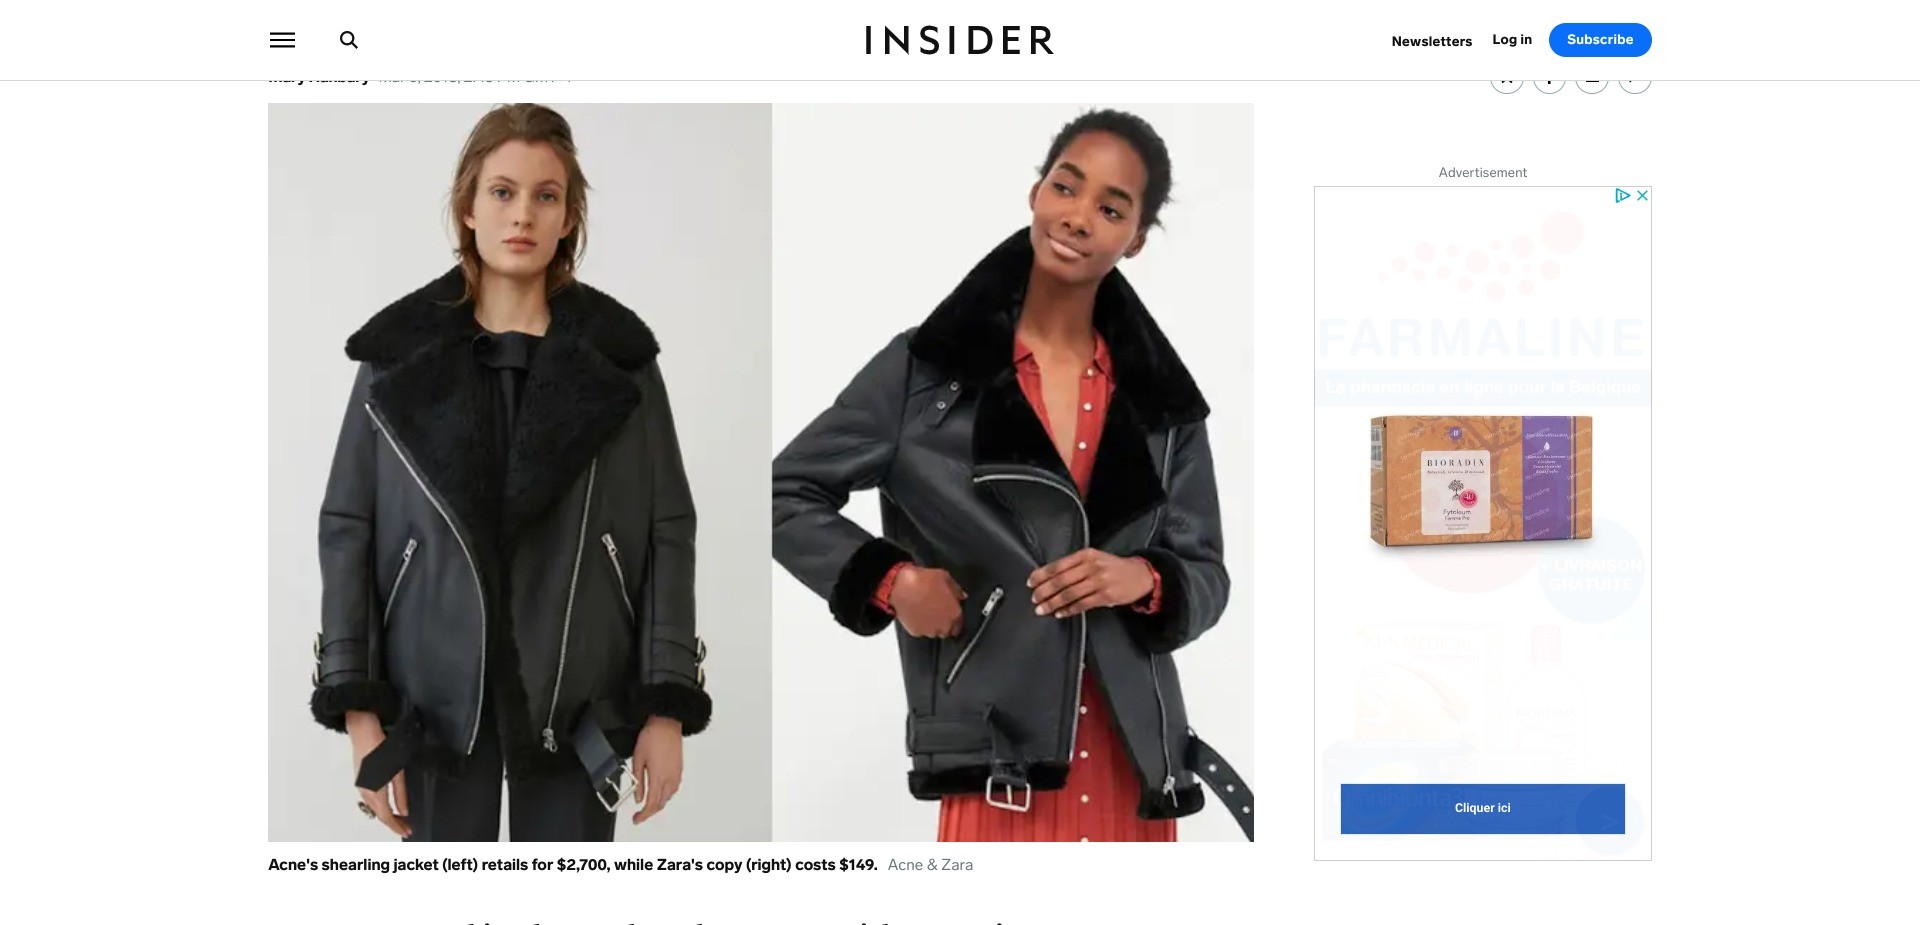 Screenshot of insider.com displaying a leather jacket by Acne and a similar one by Zara